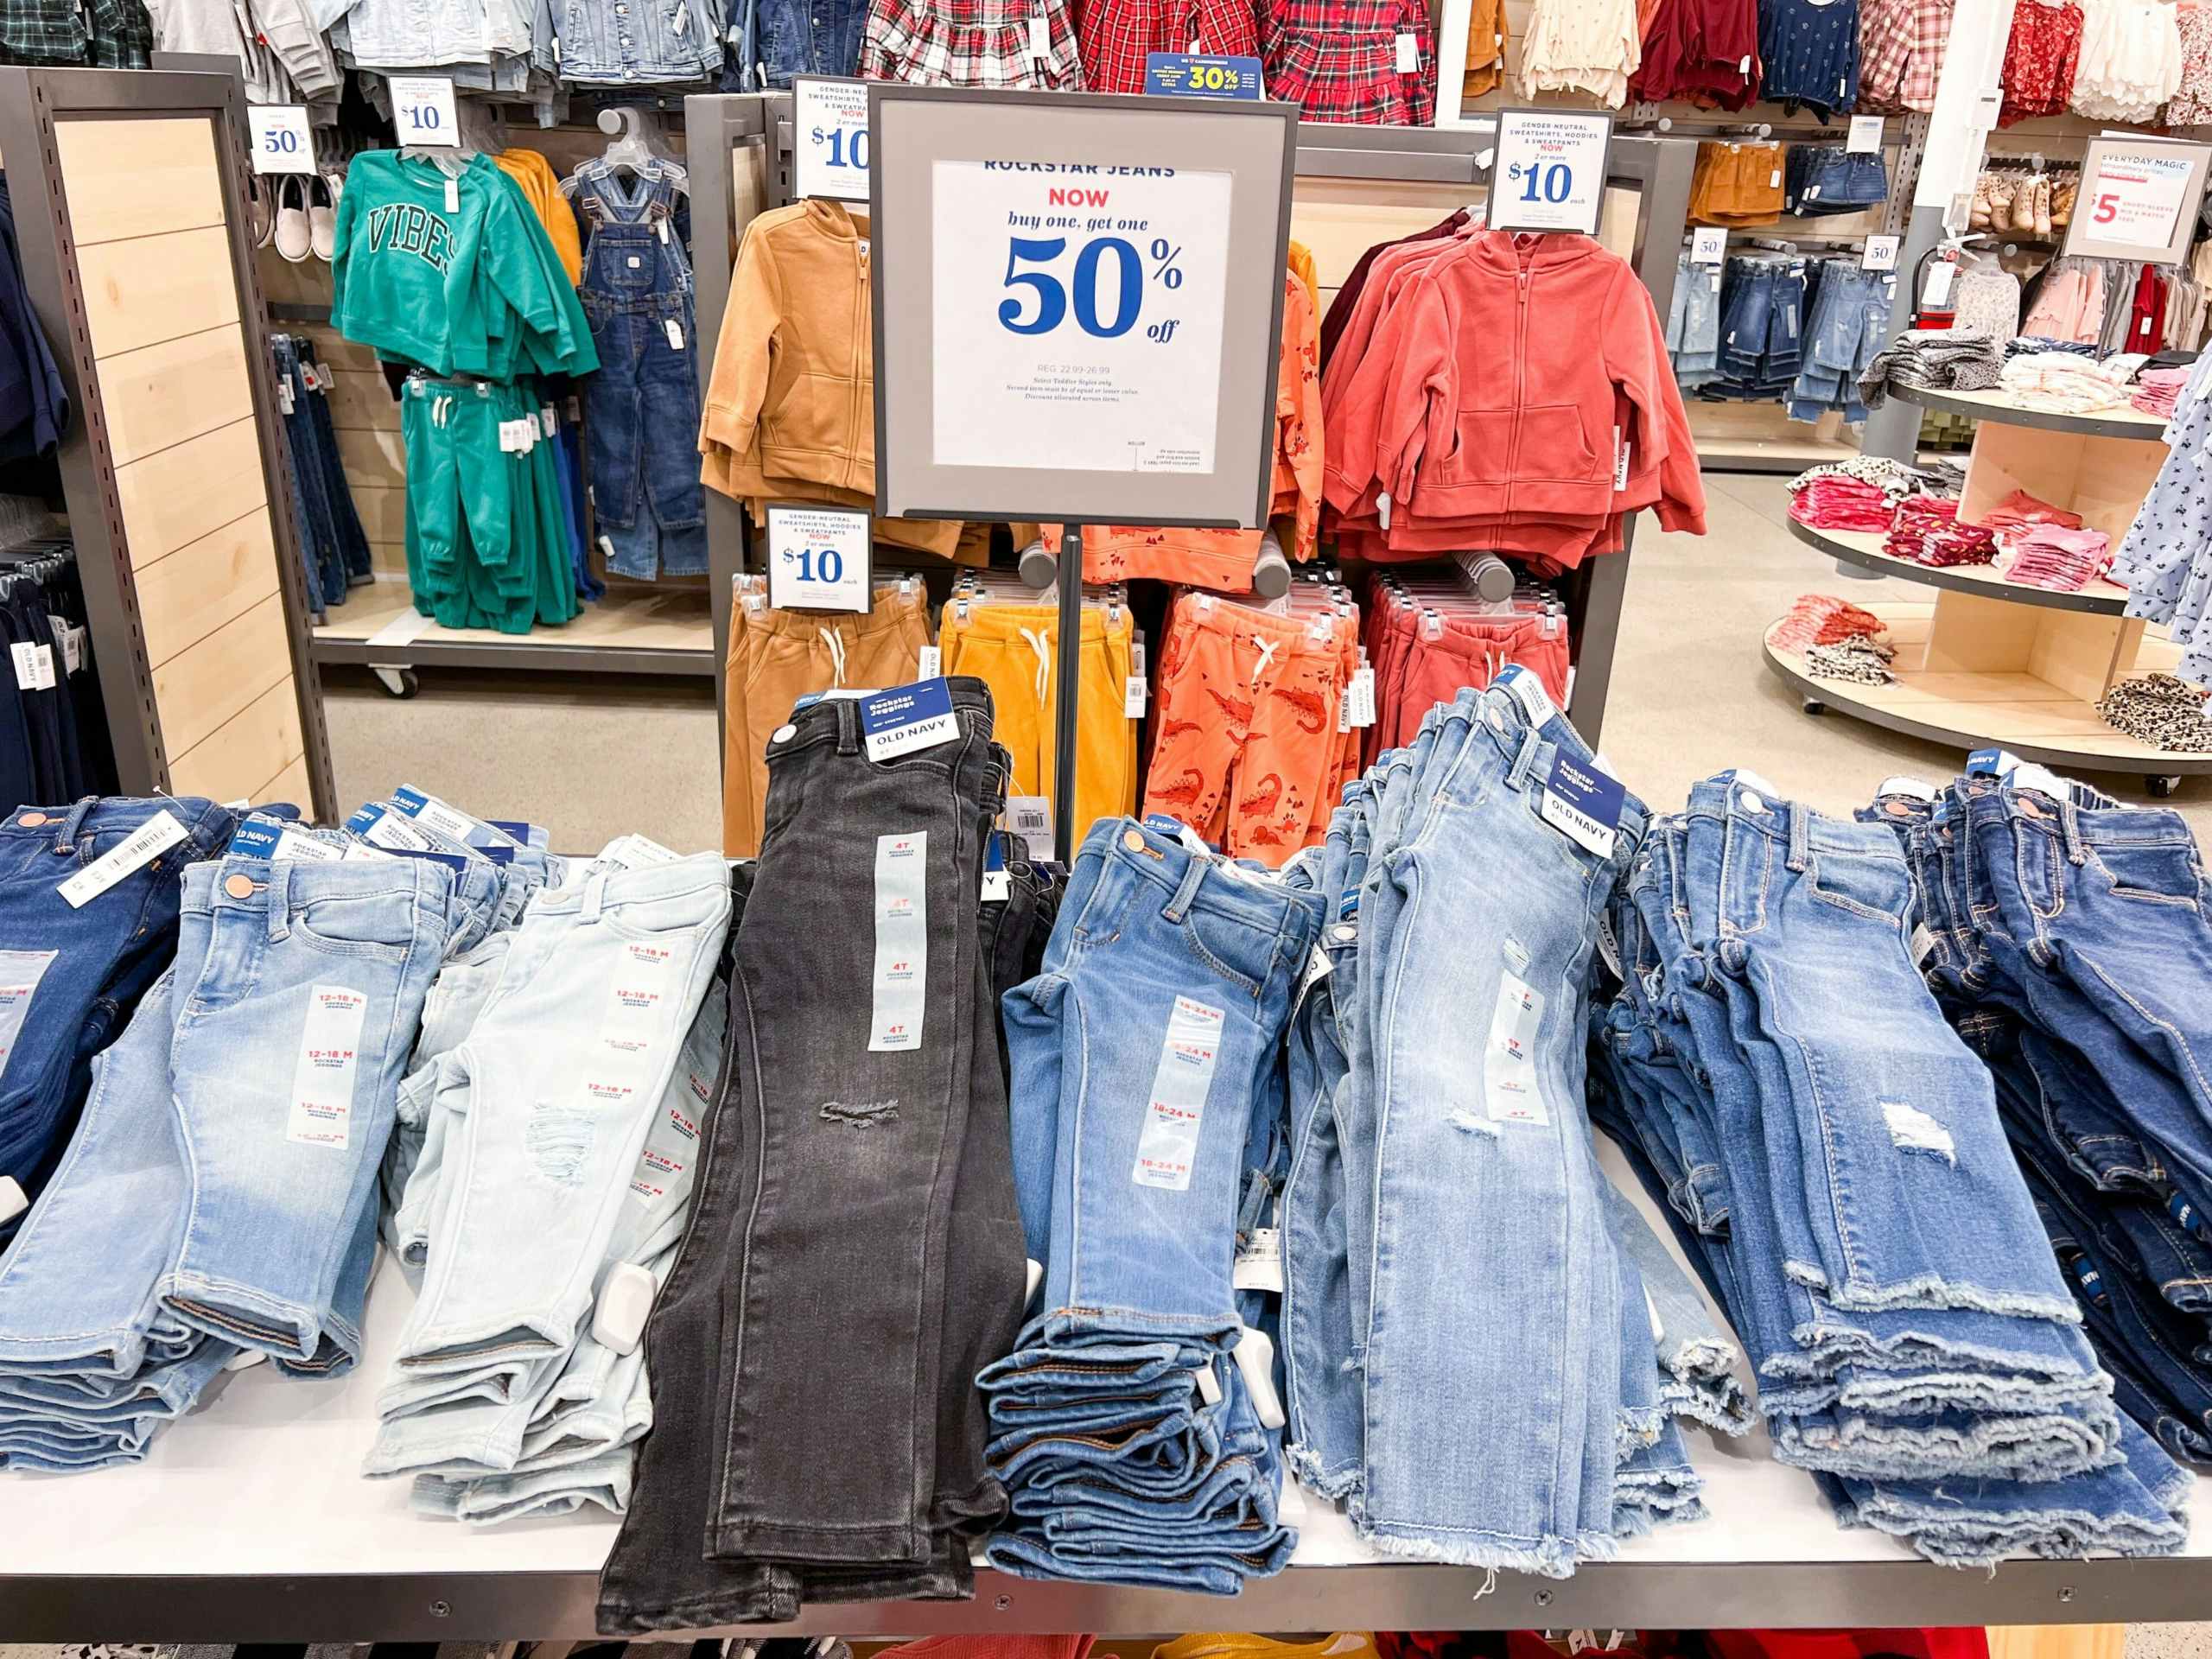 jeans on display in store